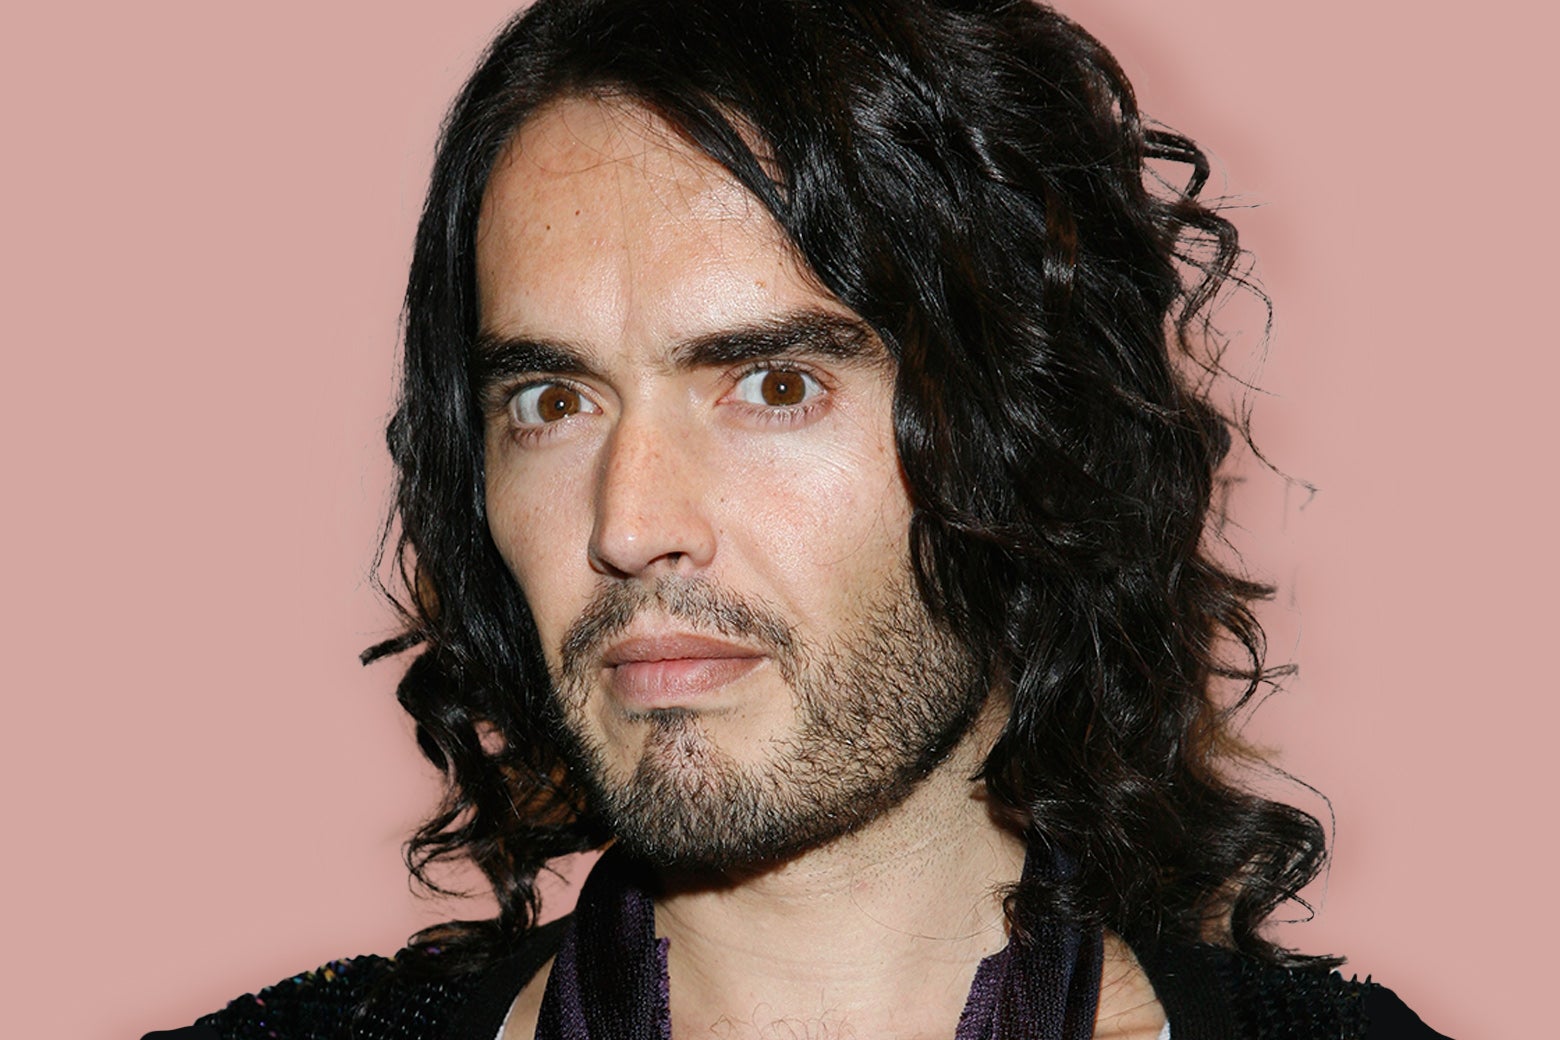 Russell Brand rape allegations Comedians misogyny emerged from a specific moment.